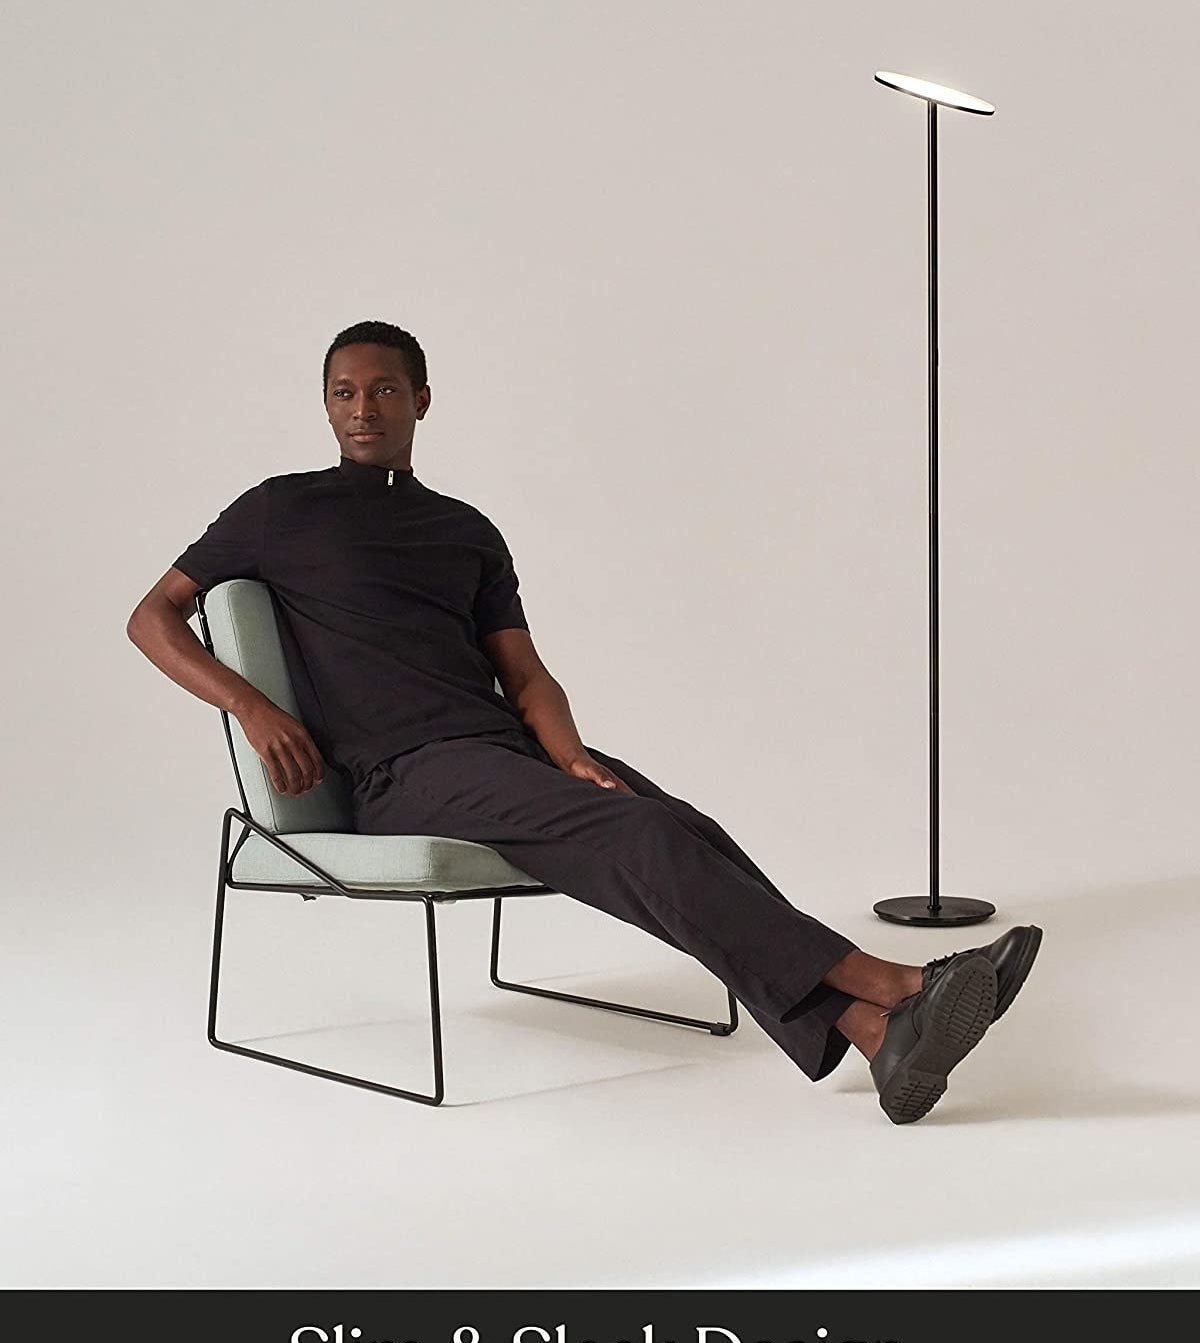 A person sitting on a chair in front of the lamp